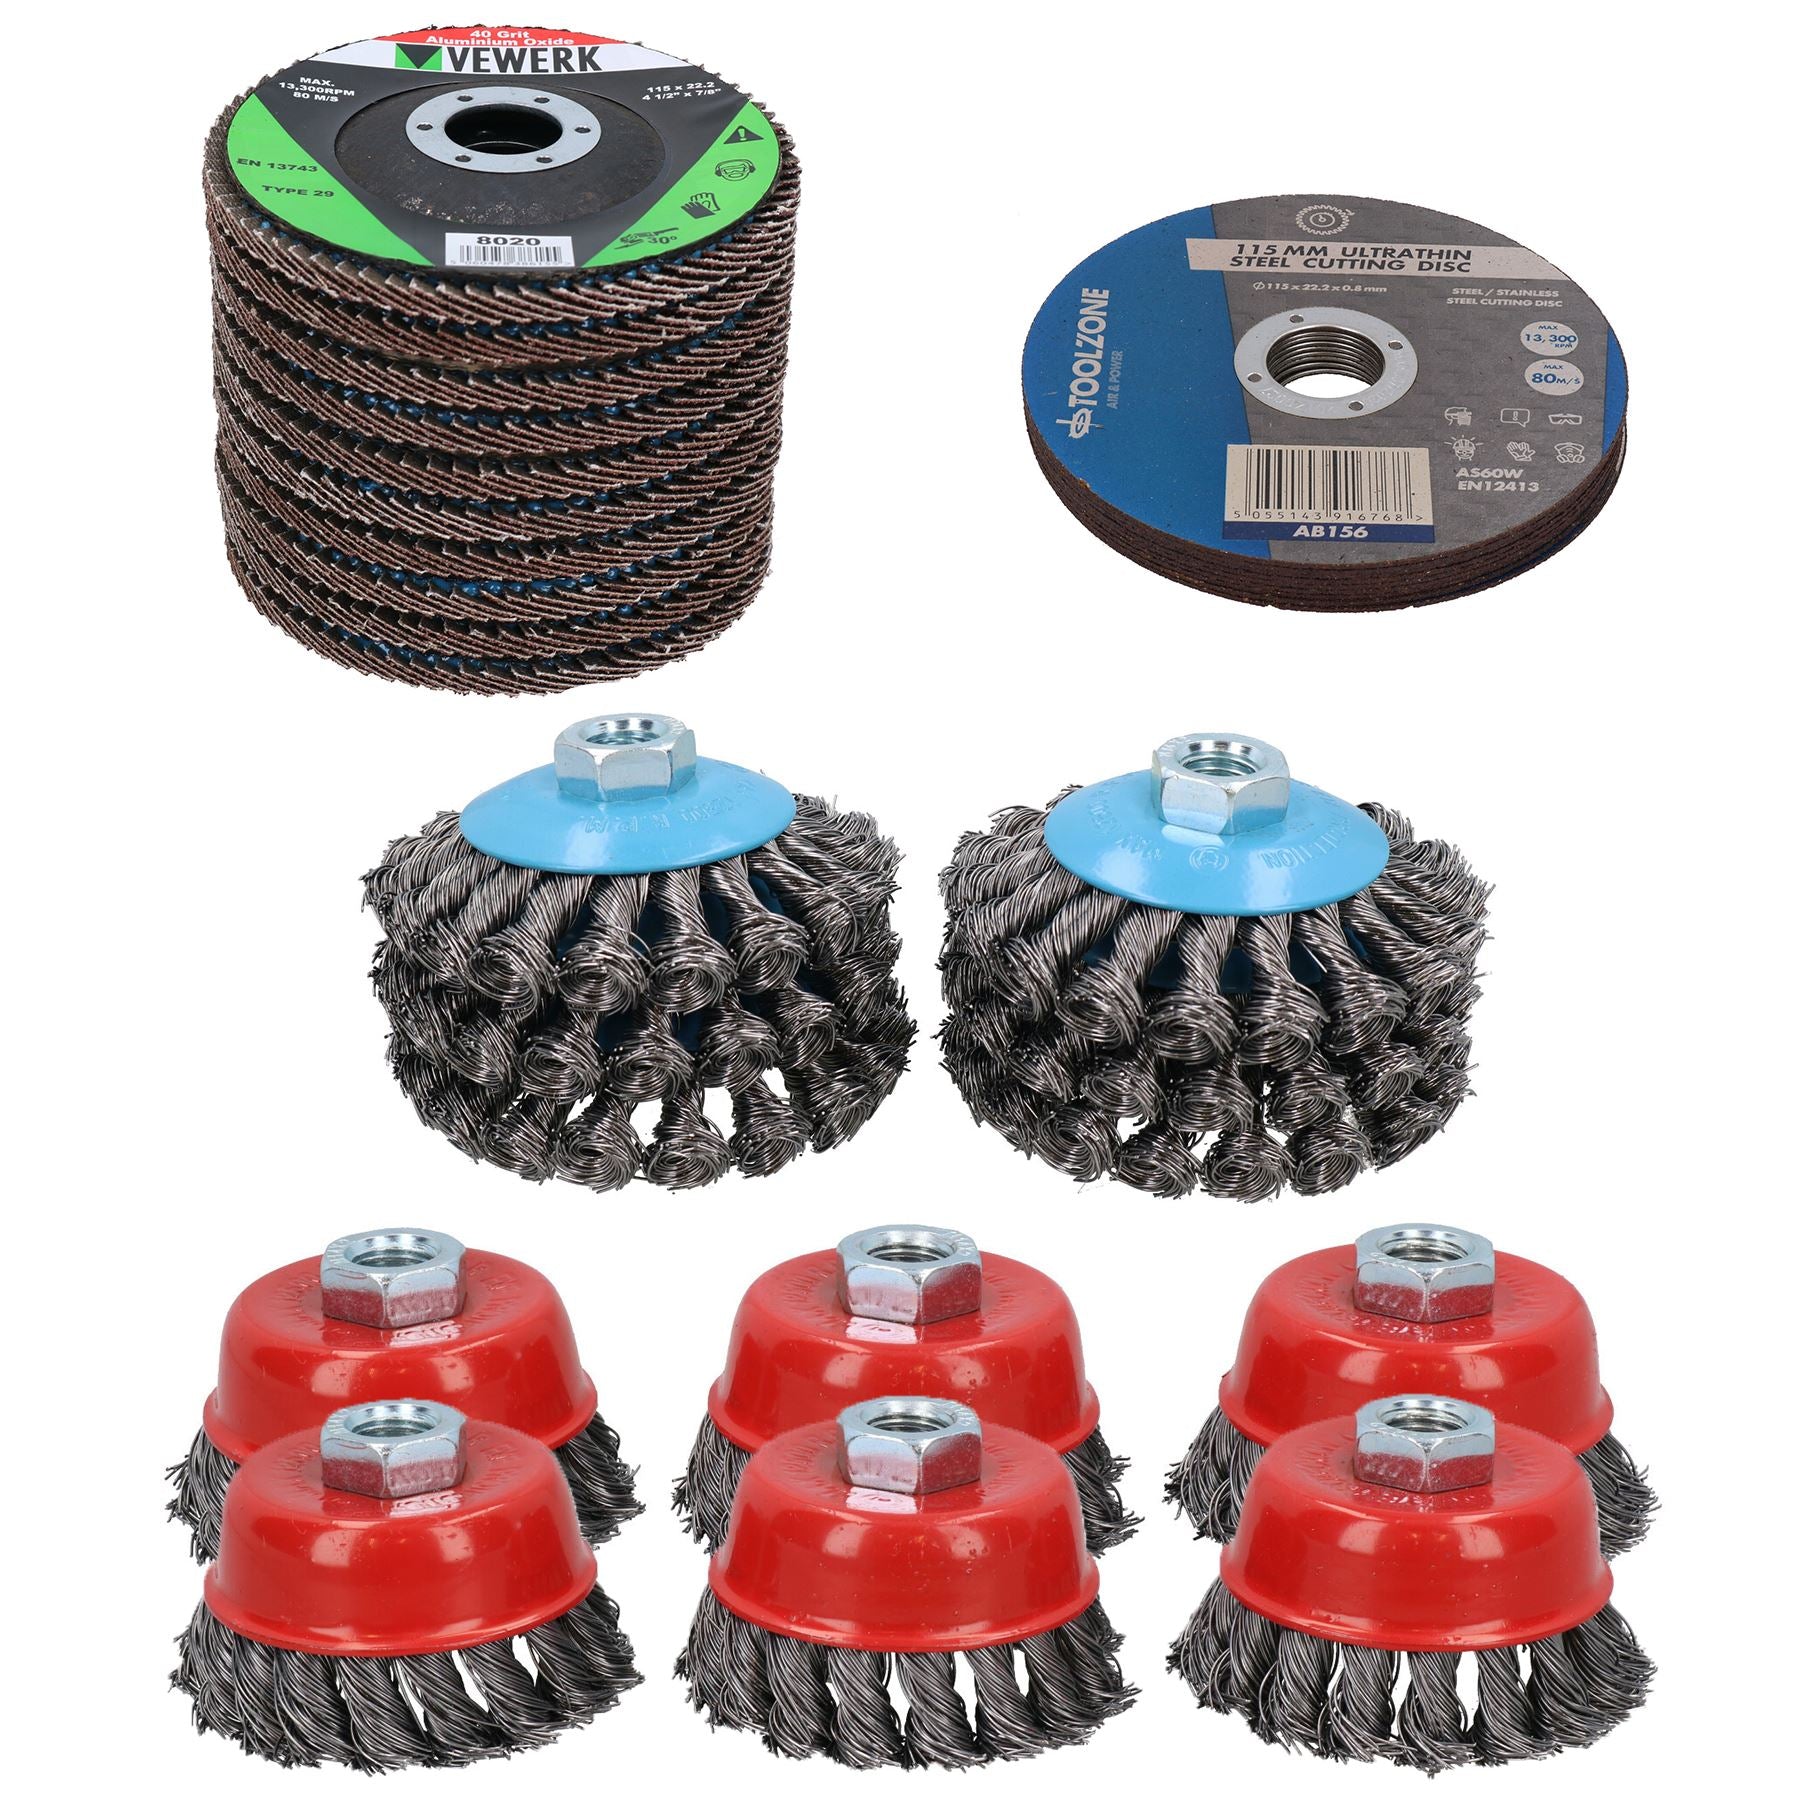 4-1/2” Angle Grinder Consumable Kit Cup Bevel Brushes Flap Cutting Discs 32pc